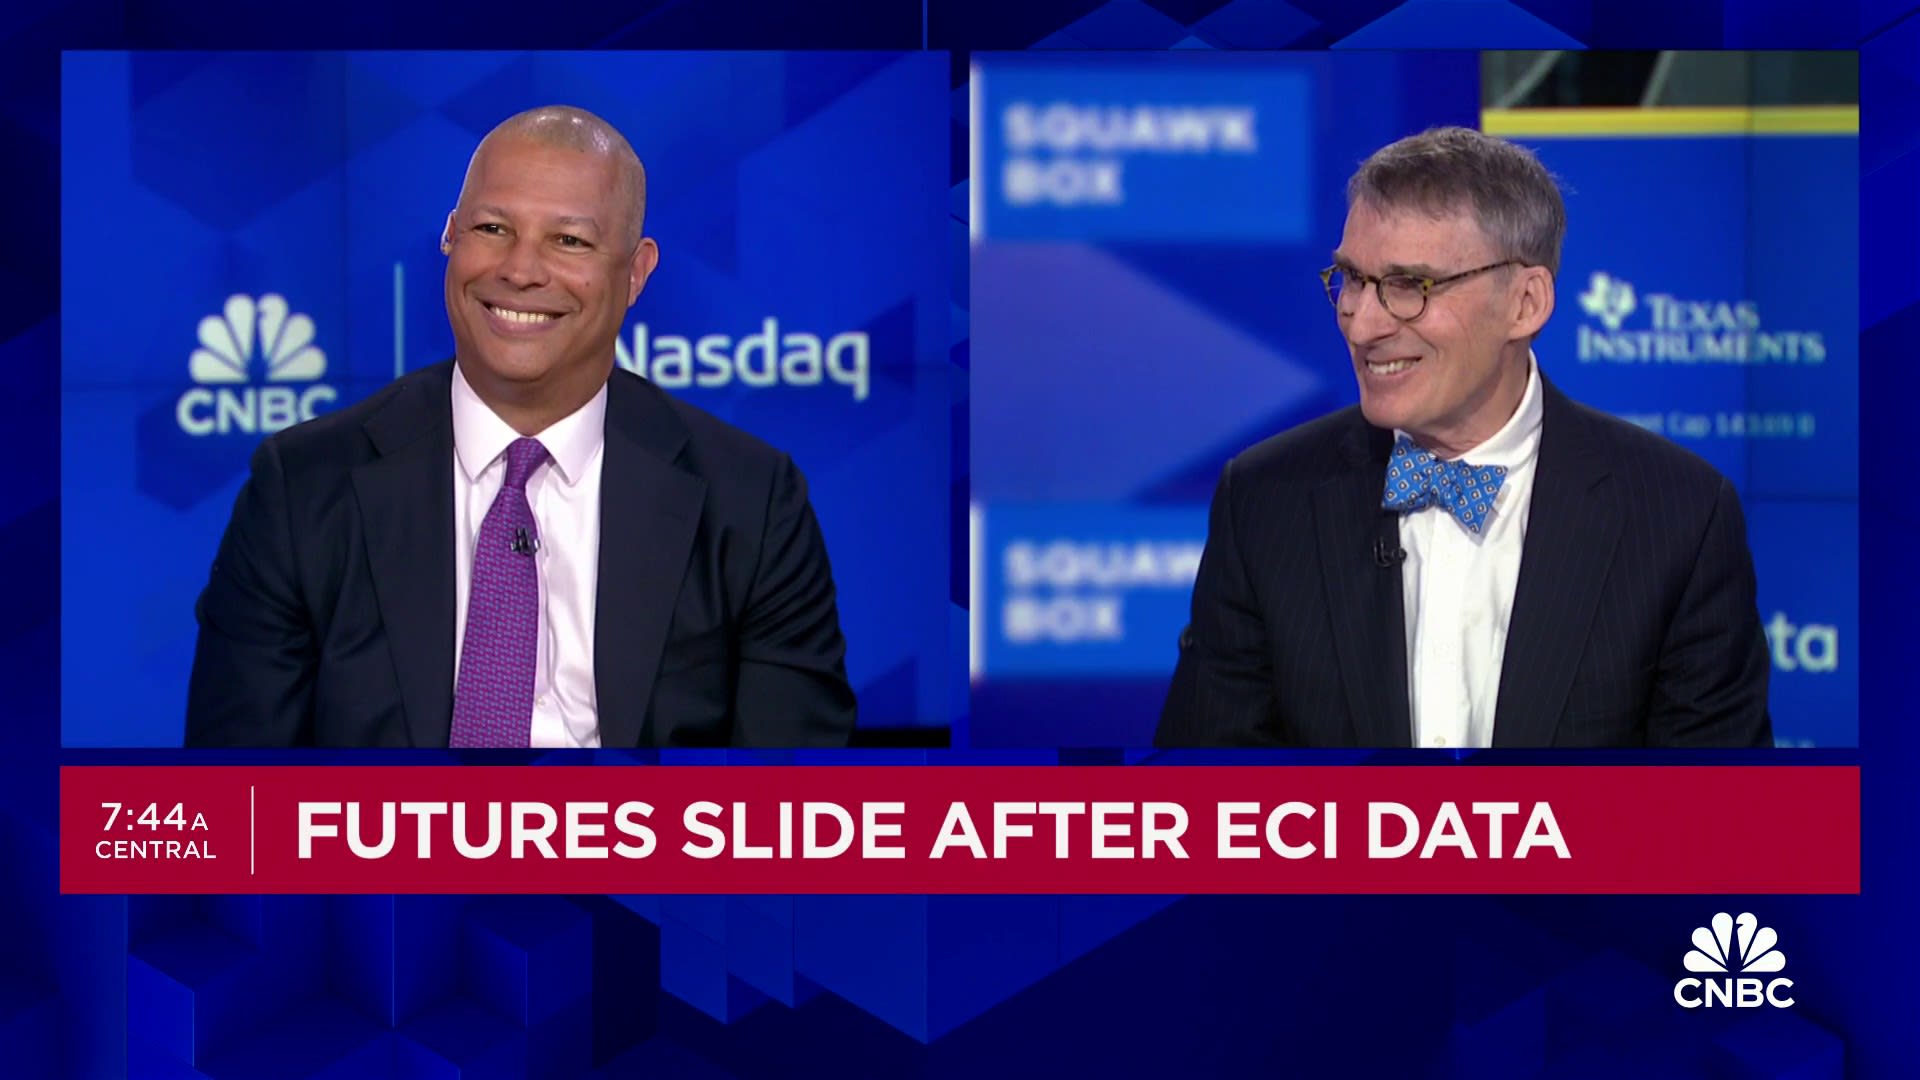 Watch CNBC’s full interview with Jim Grant and Morgan Stanley’s Seth Carpenter [Video]